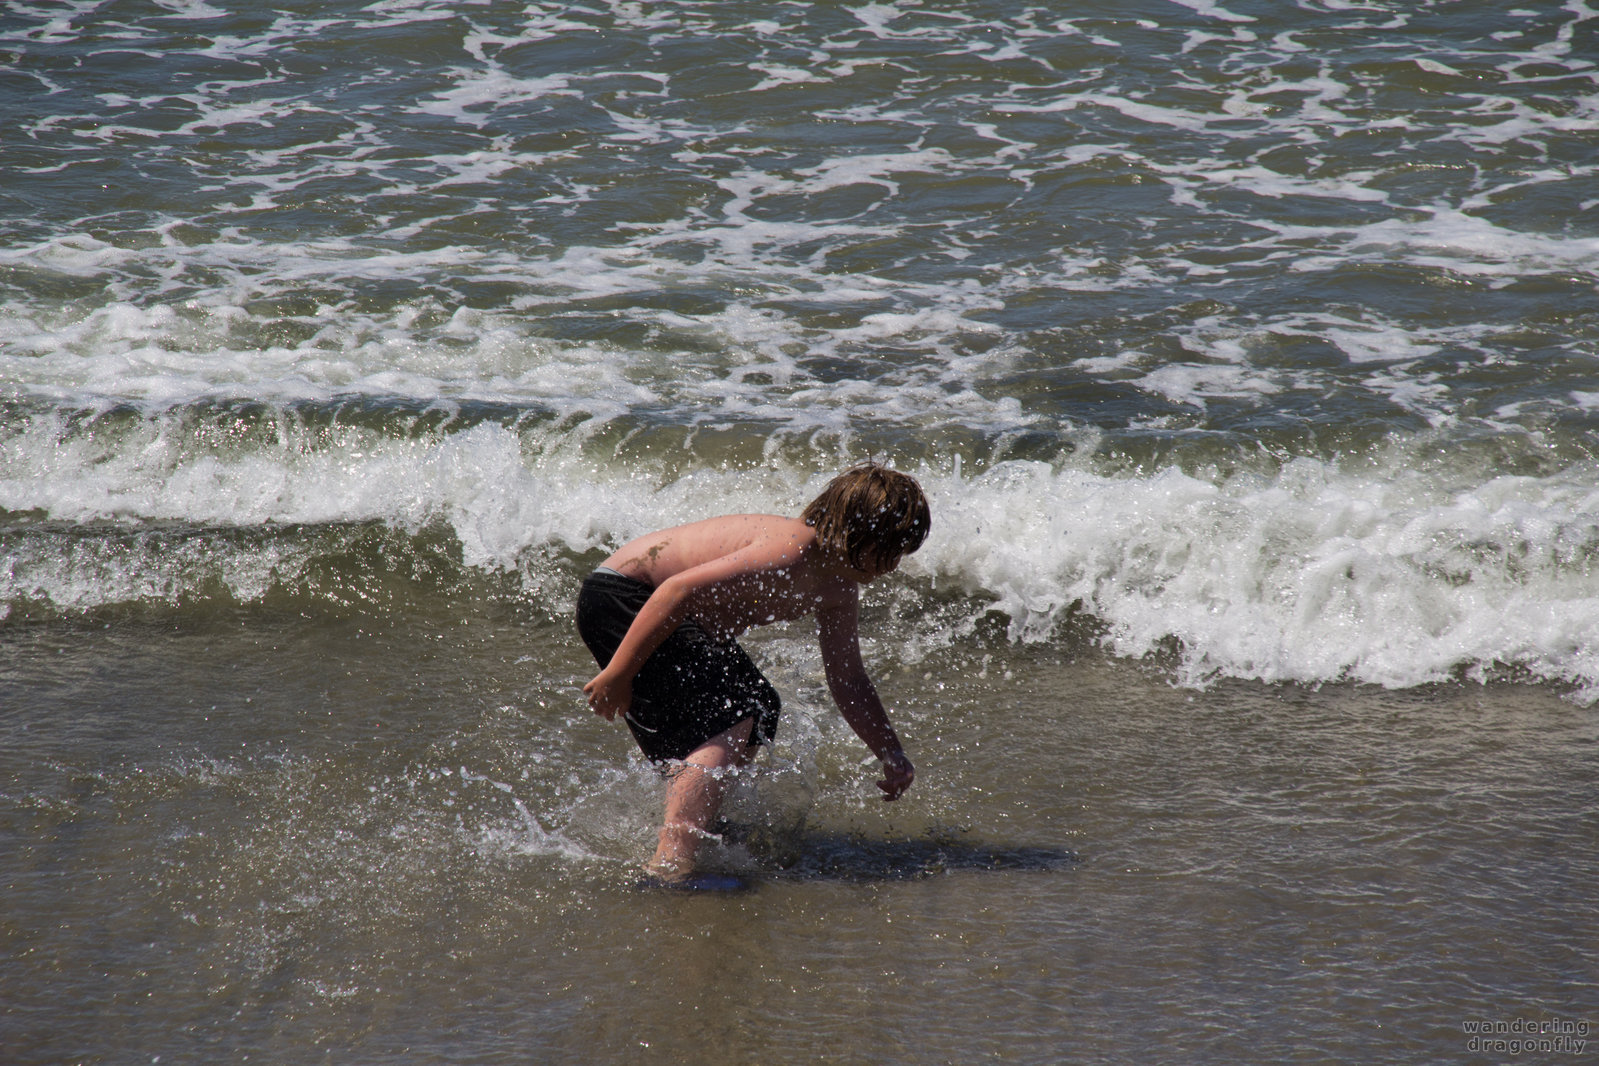 The waves always bring some fun -- boy, playing, water